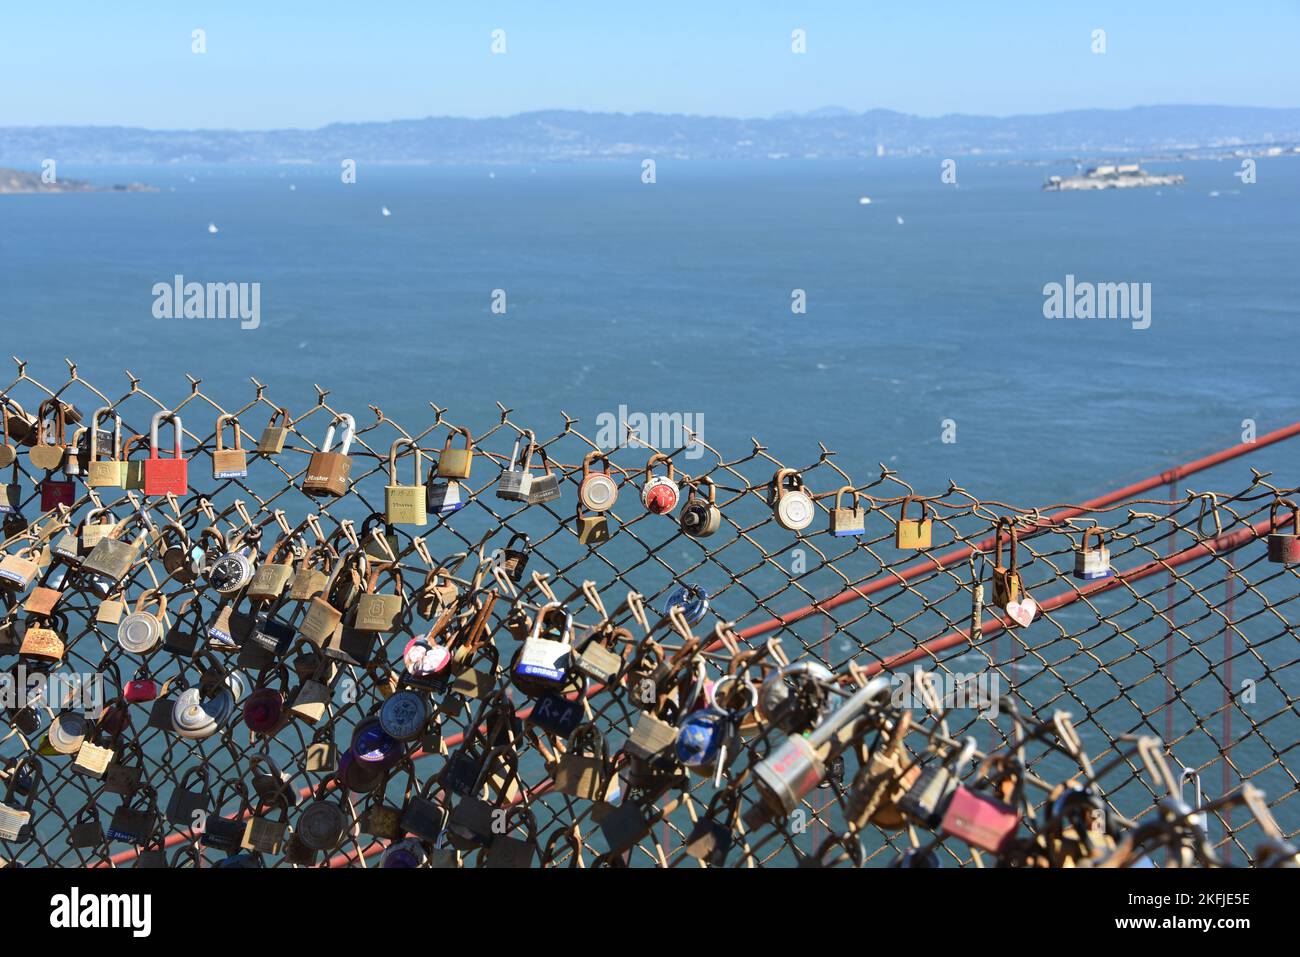 Close up of many lovelock padlocks placed by tourists on a chain link fence above the Golden Gate Bridge with the San Francisco bay in the background Stock Photo